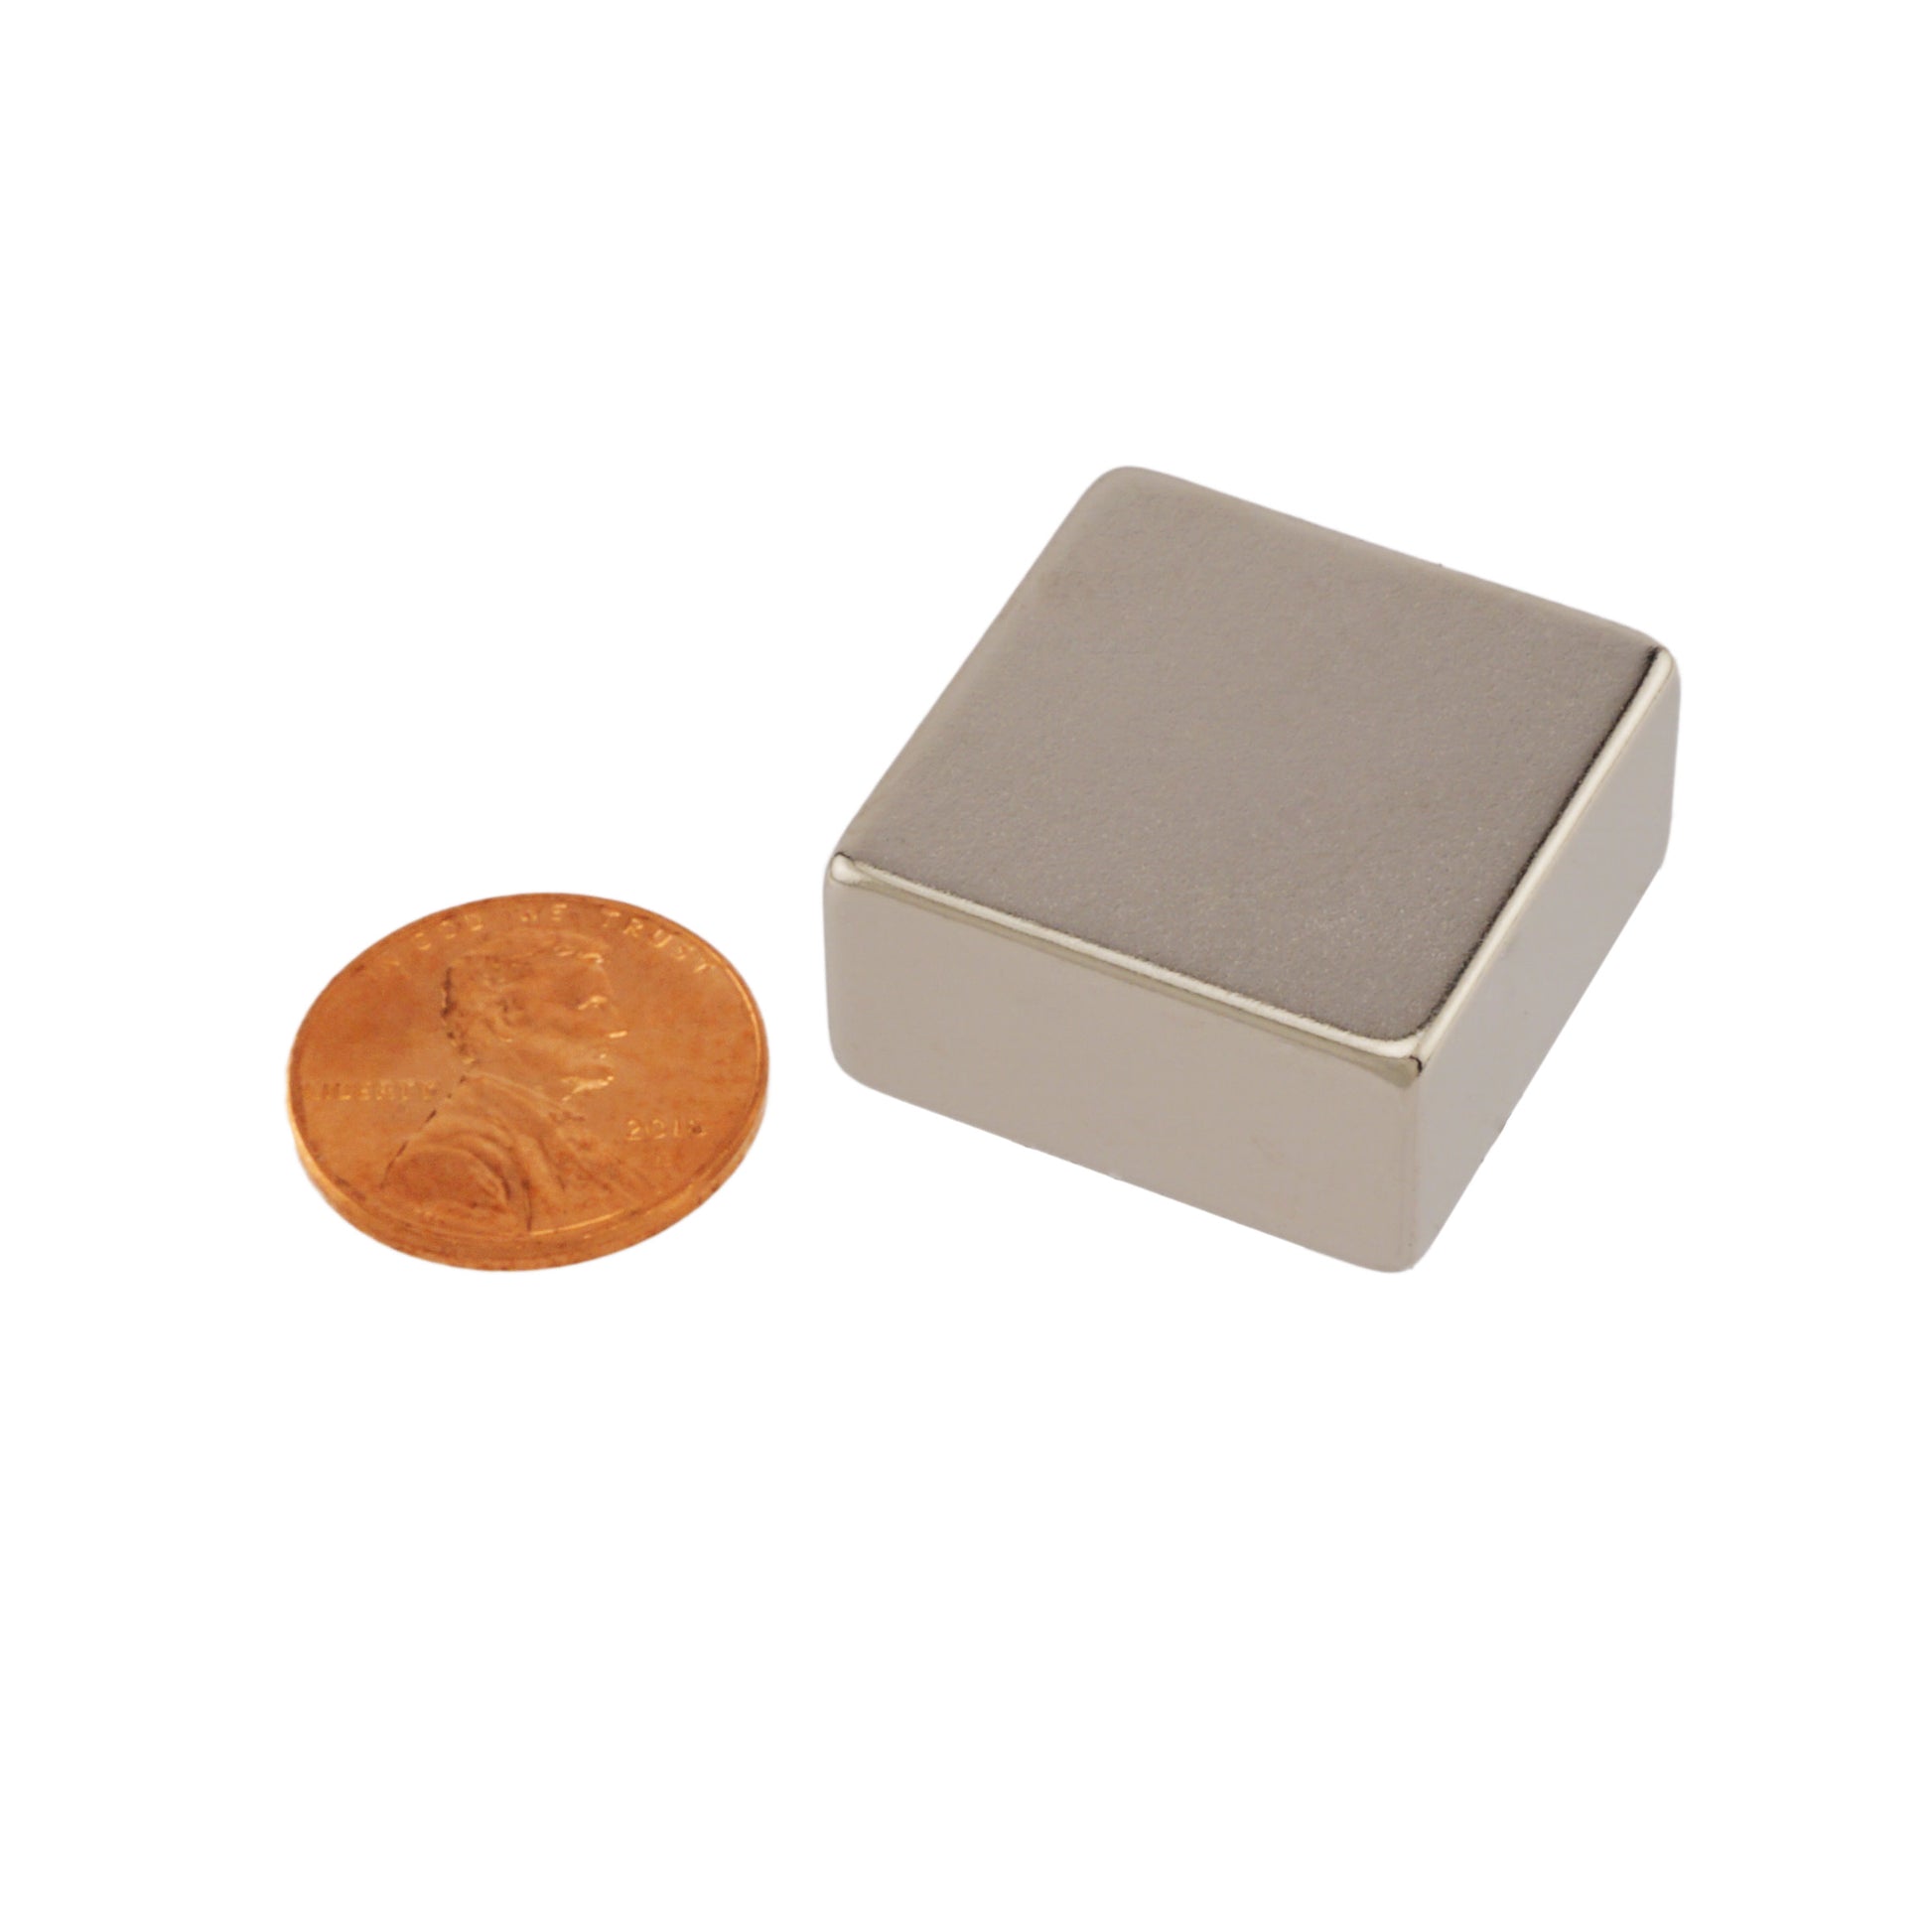 Load image into Gallery viewer, NB006N-35 Neodymium Block Magnet - Compared to Penny for Size Reference